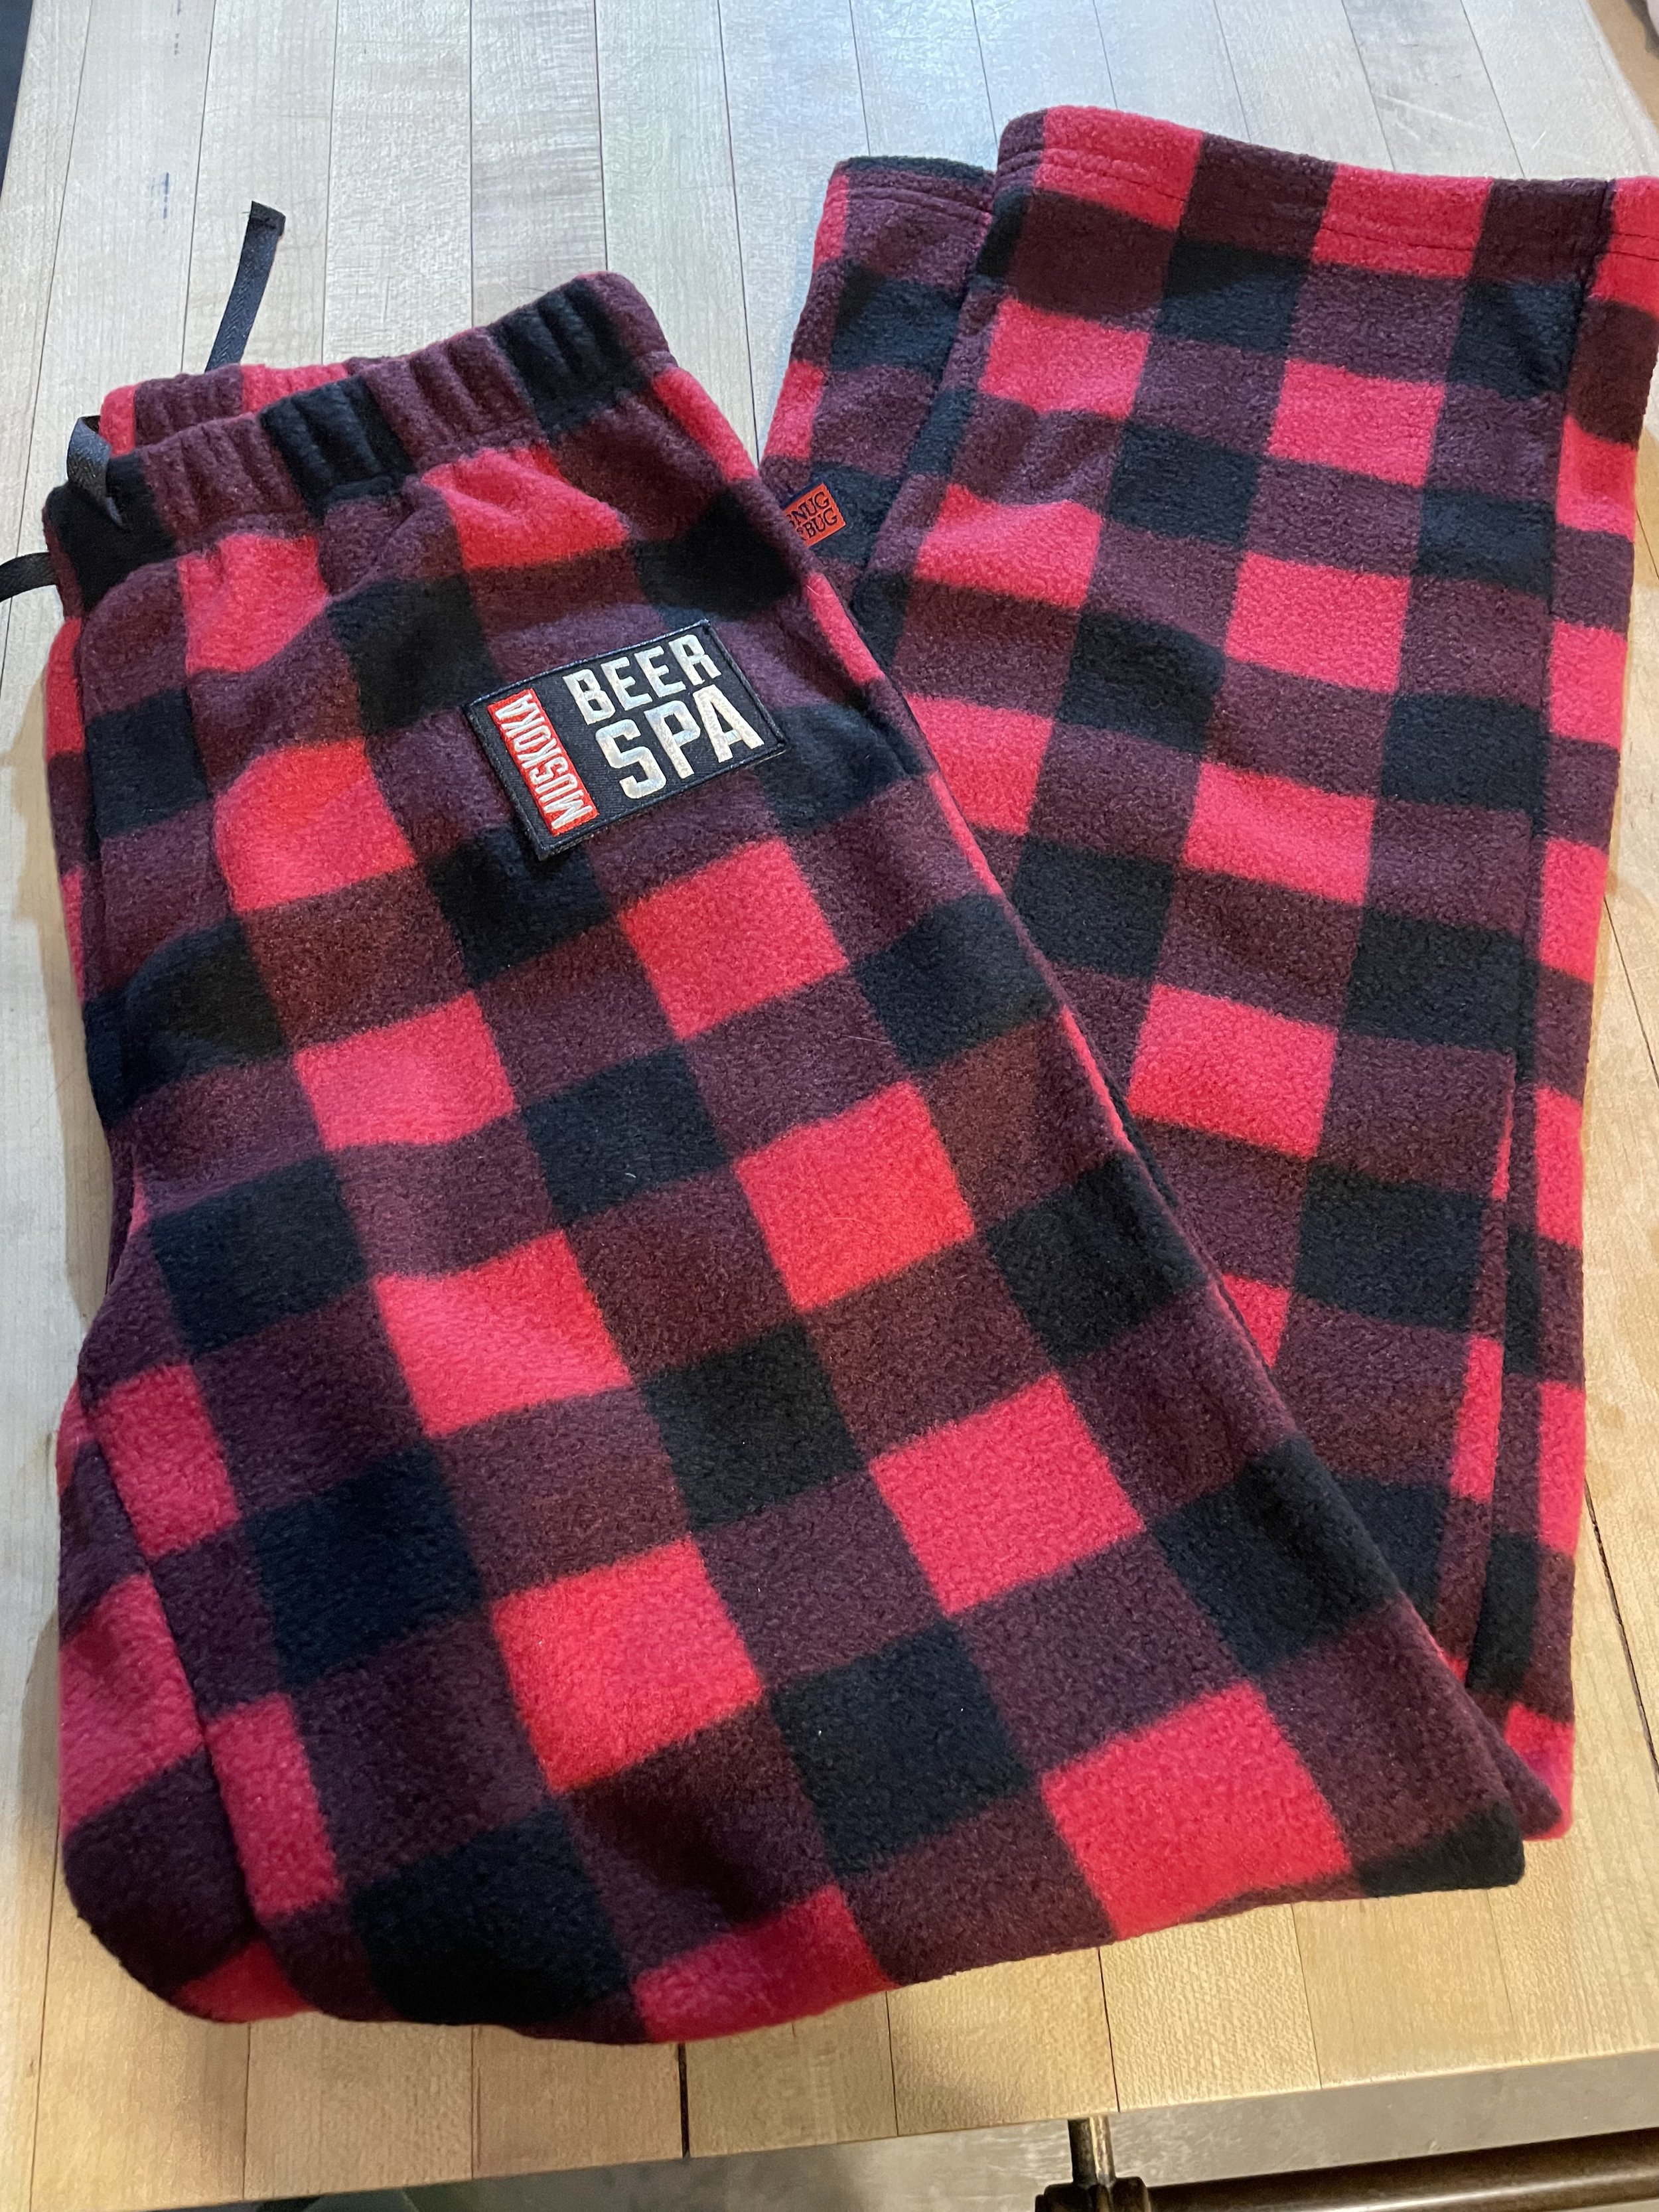 Men's Plush Sleep Pants: Red Buffalo Plaid Pants, Relaxed Fit, Sizes up to  3XL